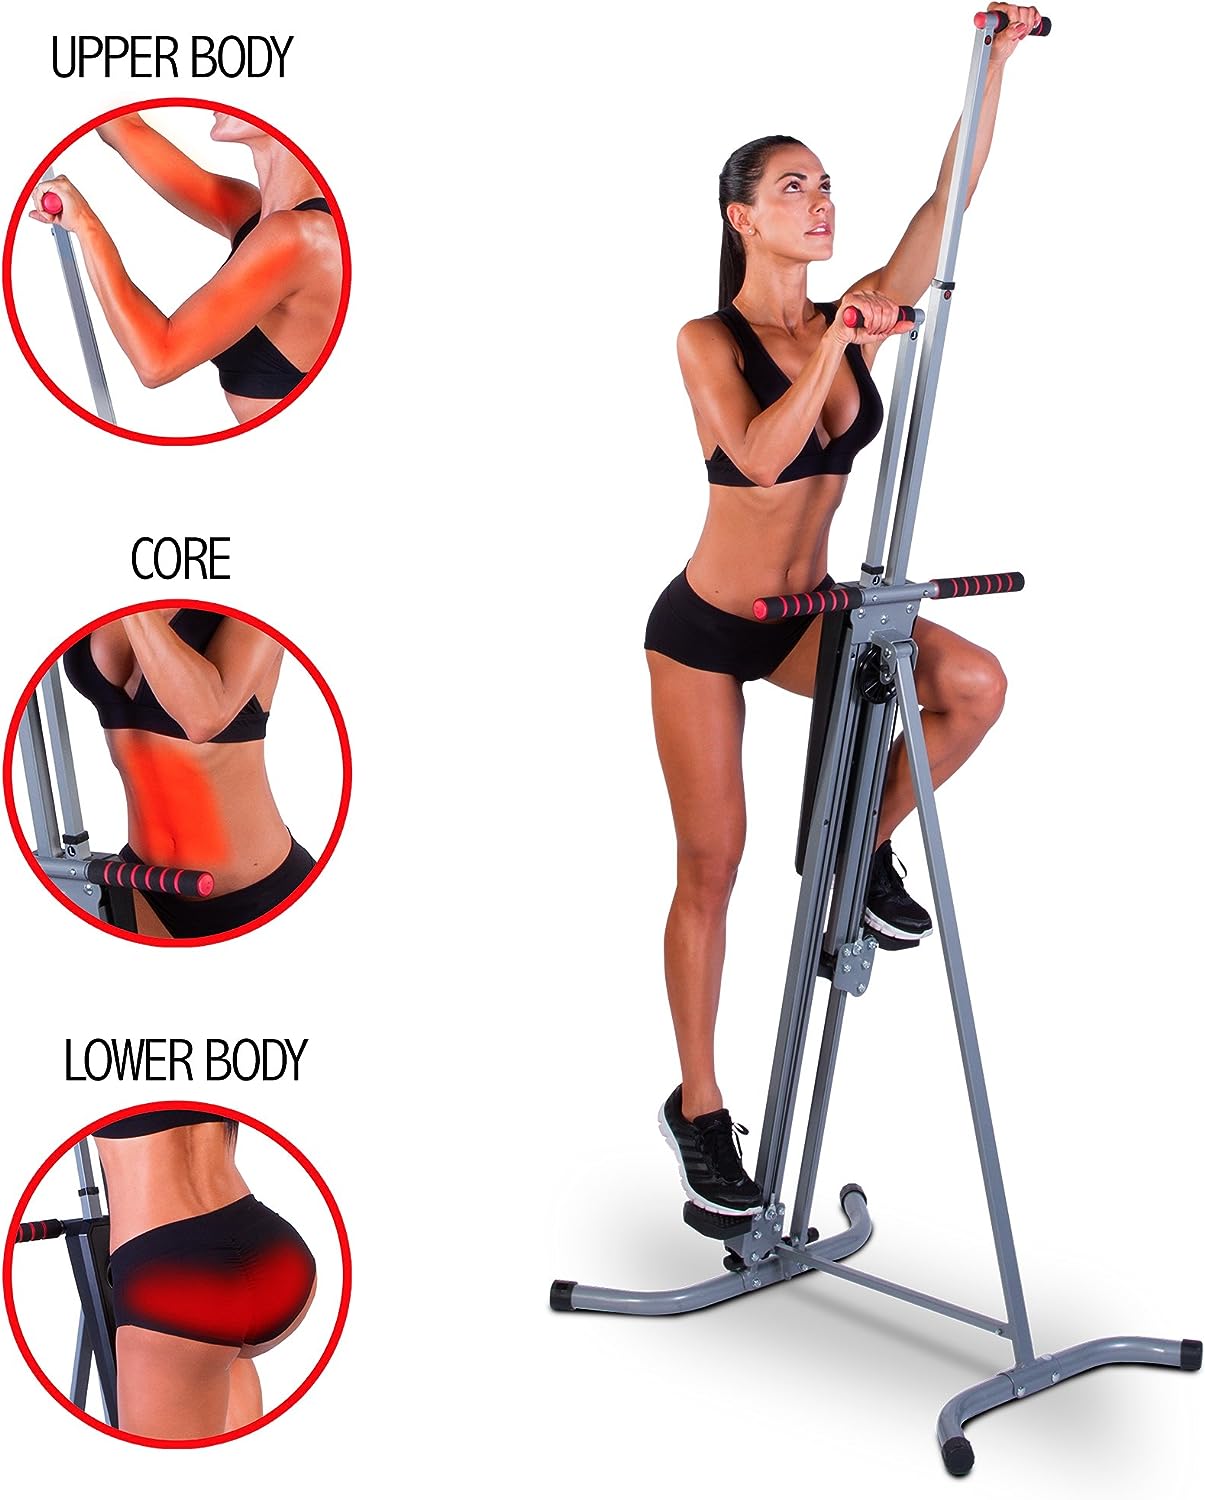 MaxiClimber Vertical Climber Combines Resistance Training and High-Intensity Cardio for a Full Body Workout. Free Coach-led Classes  Fitness App